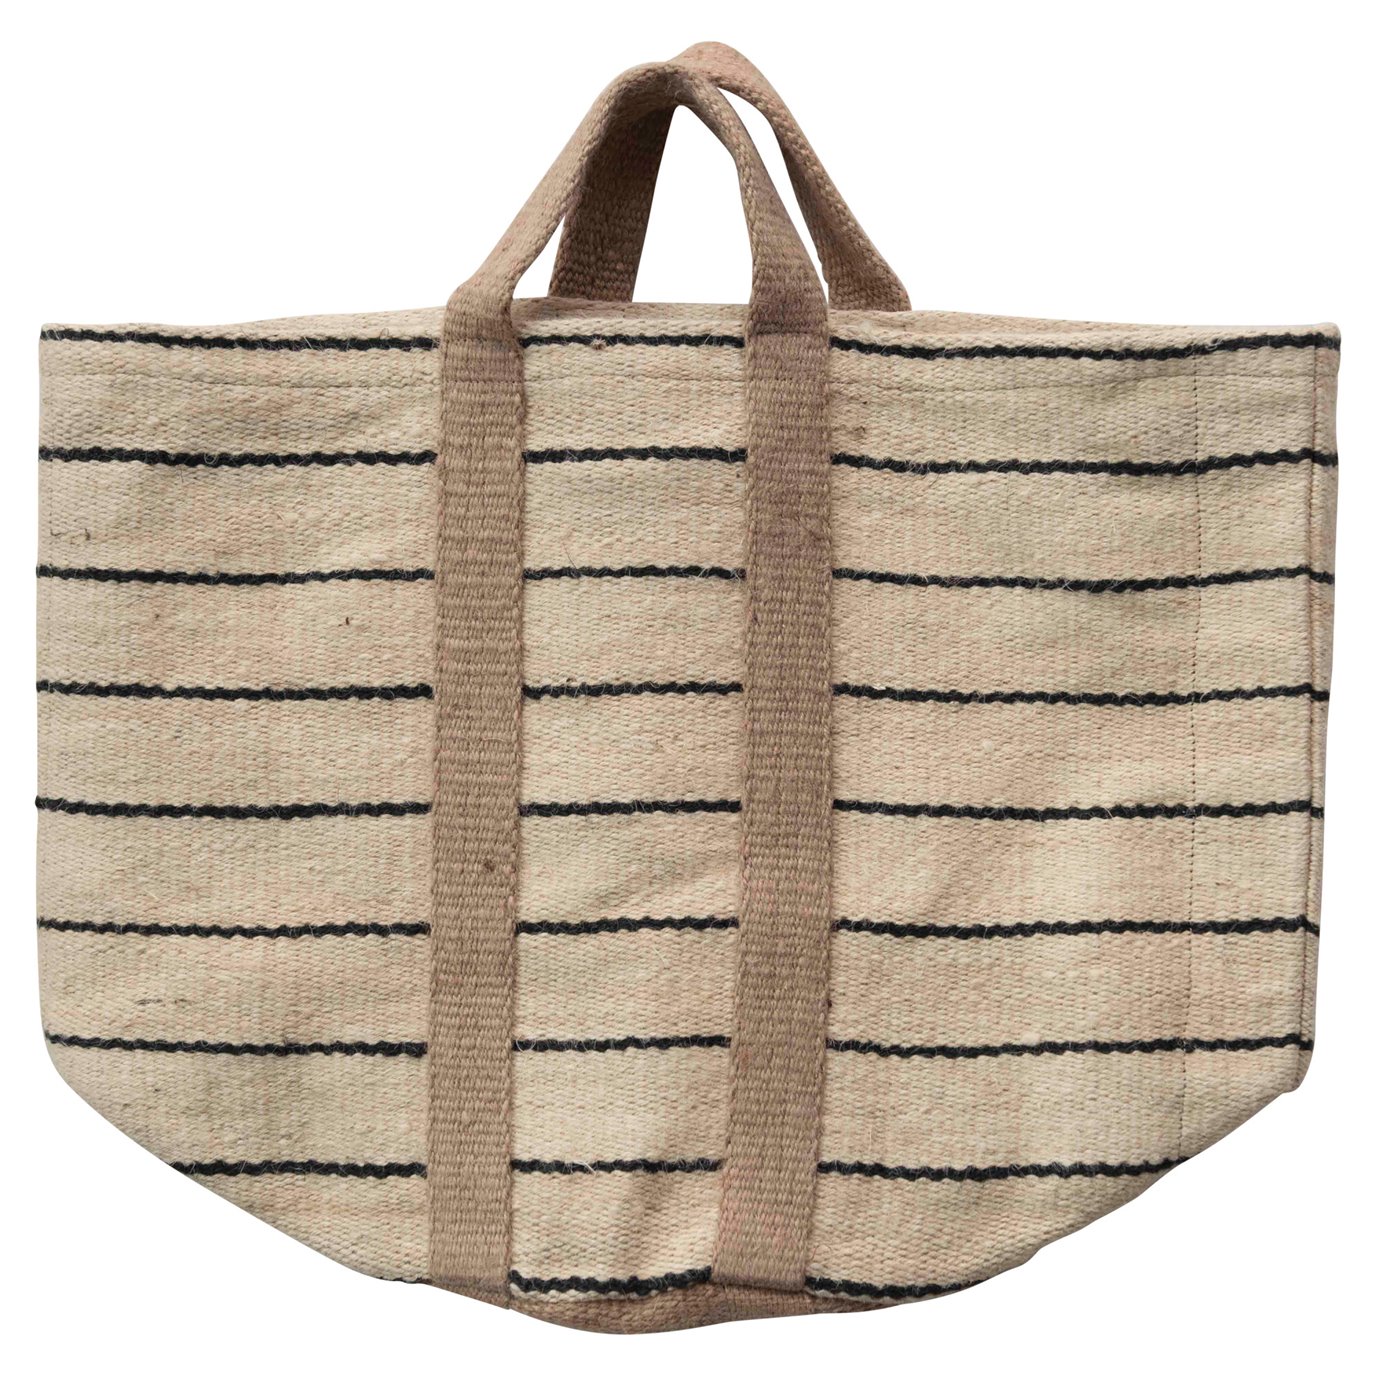 Jute Striped Bag with Handles